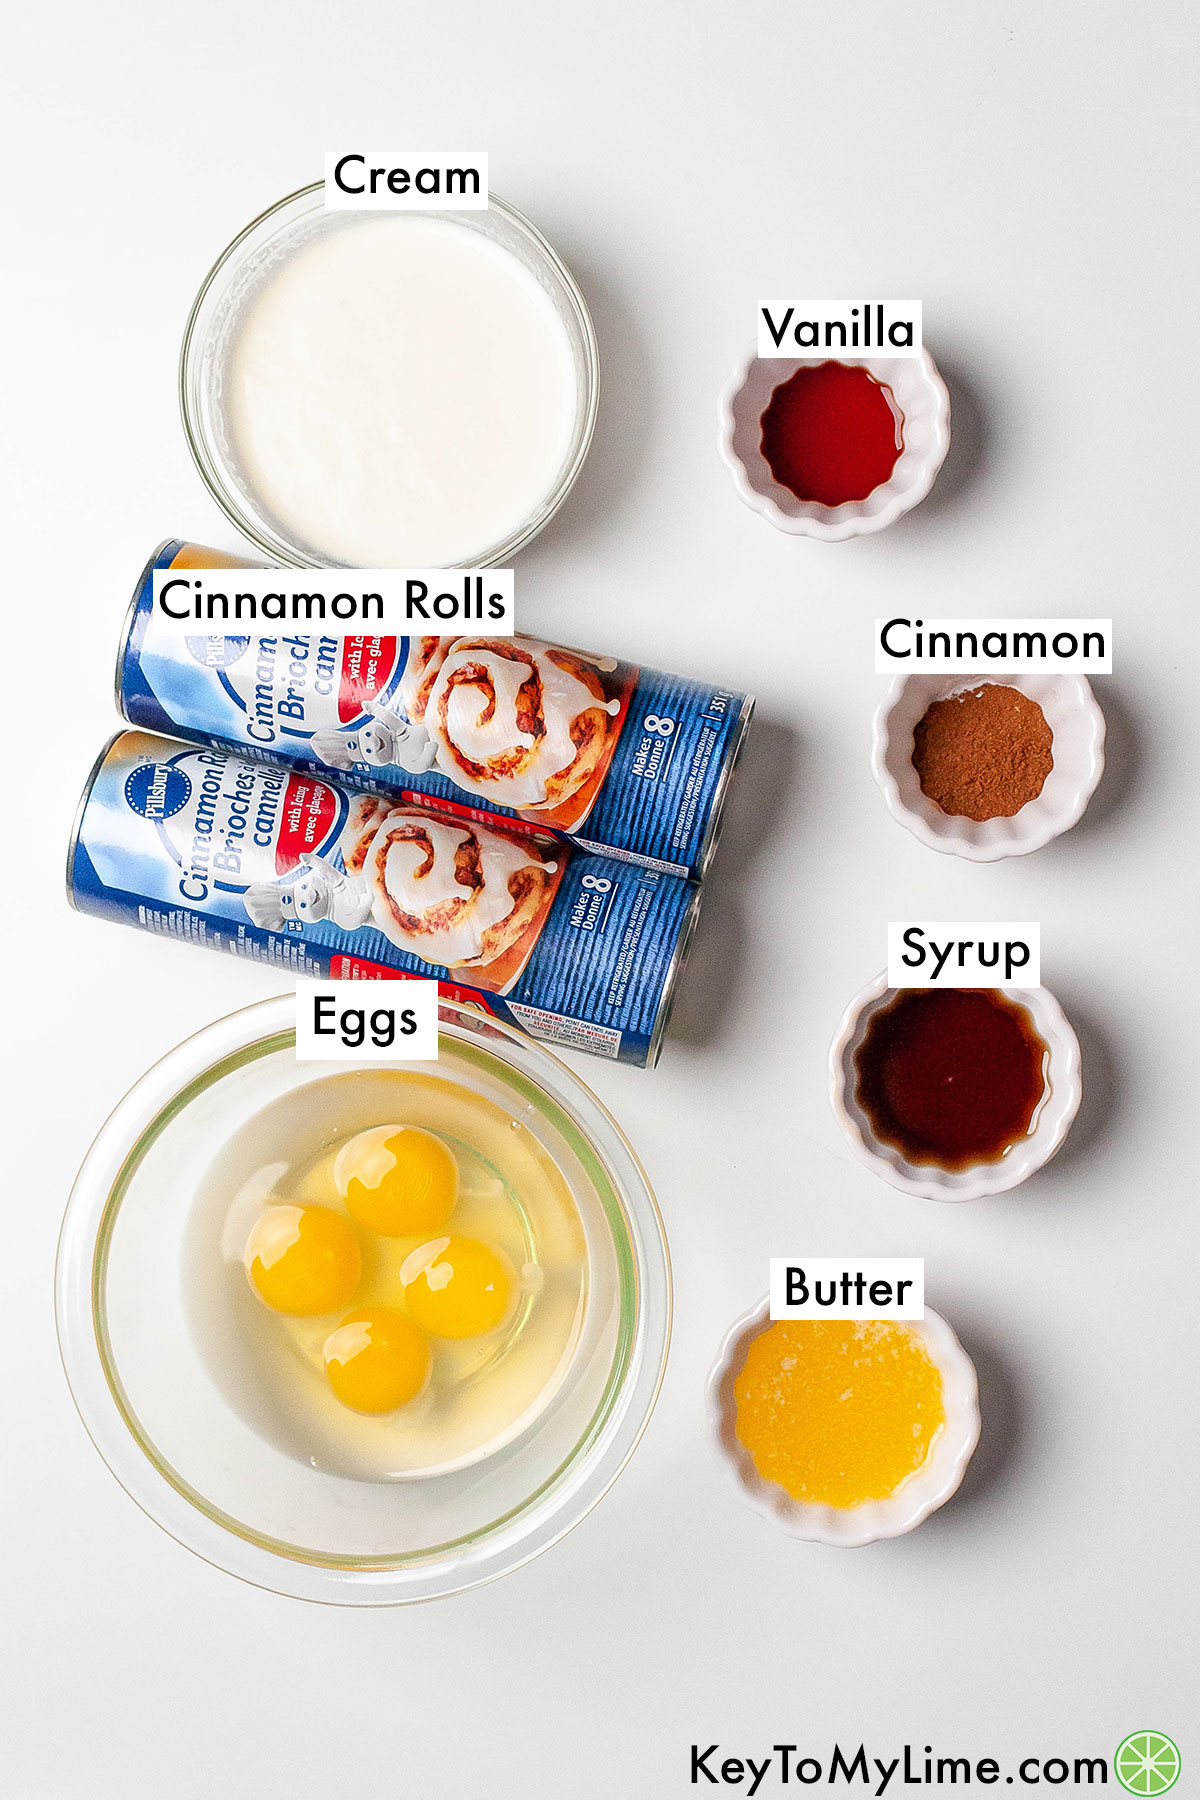 The labeled ingredients for cinnamon roll casserole.